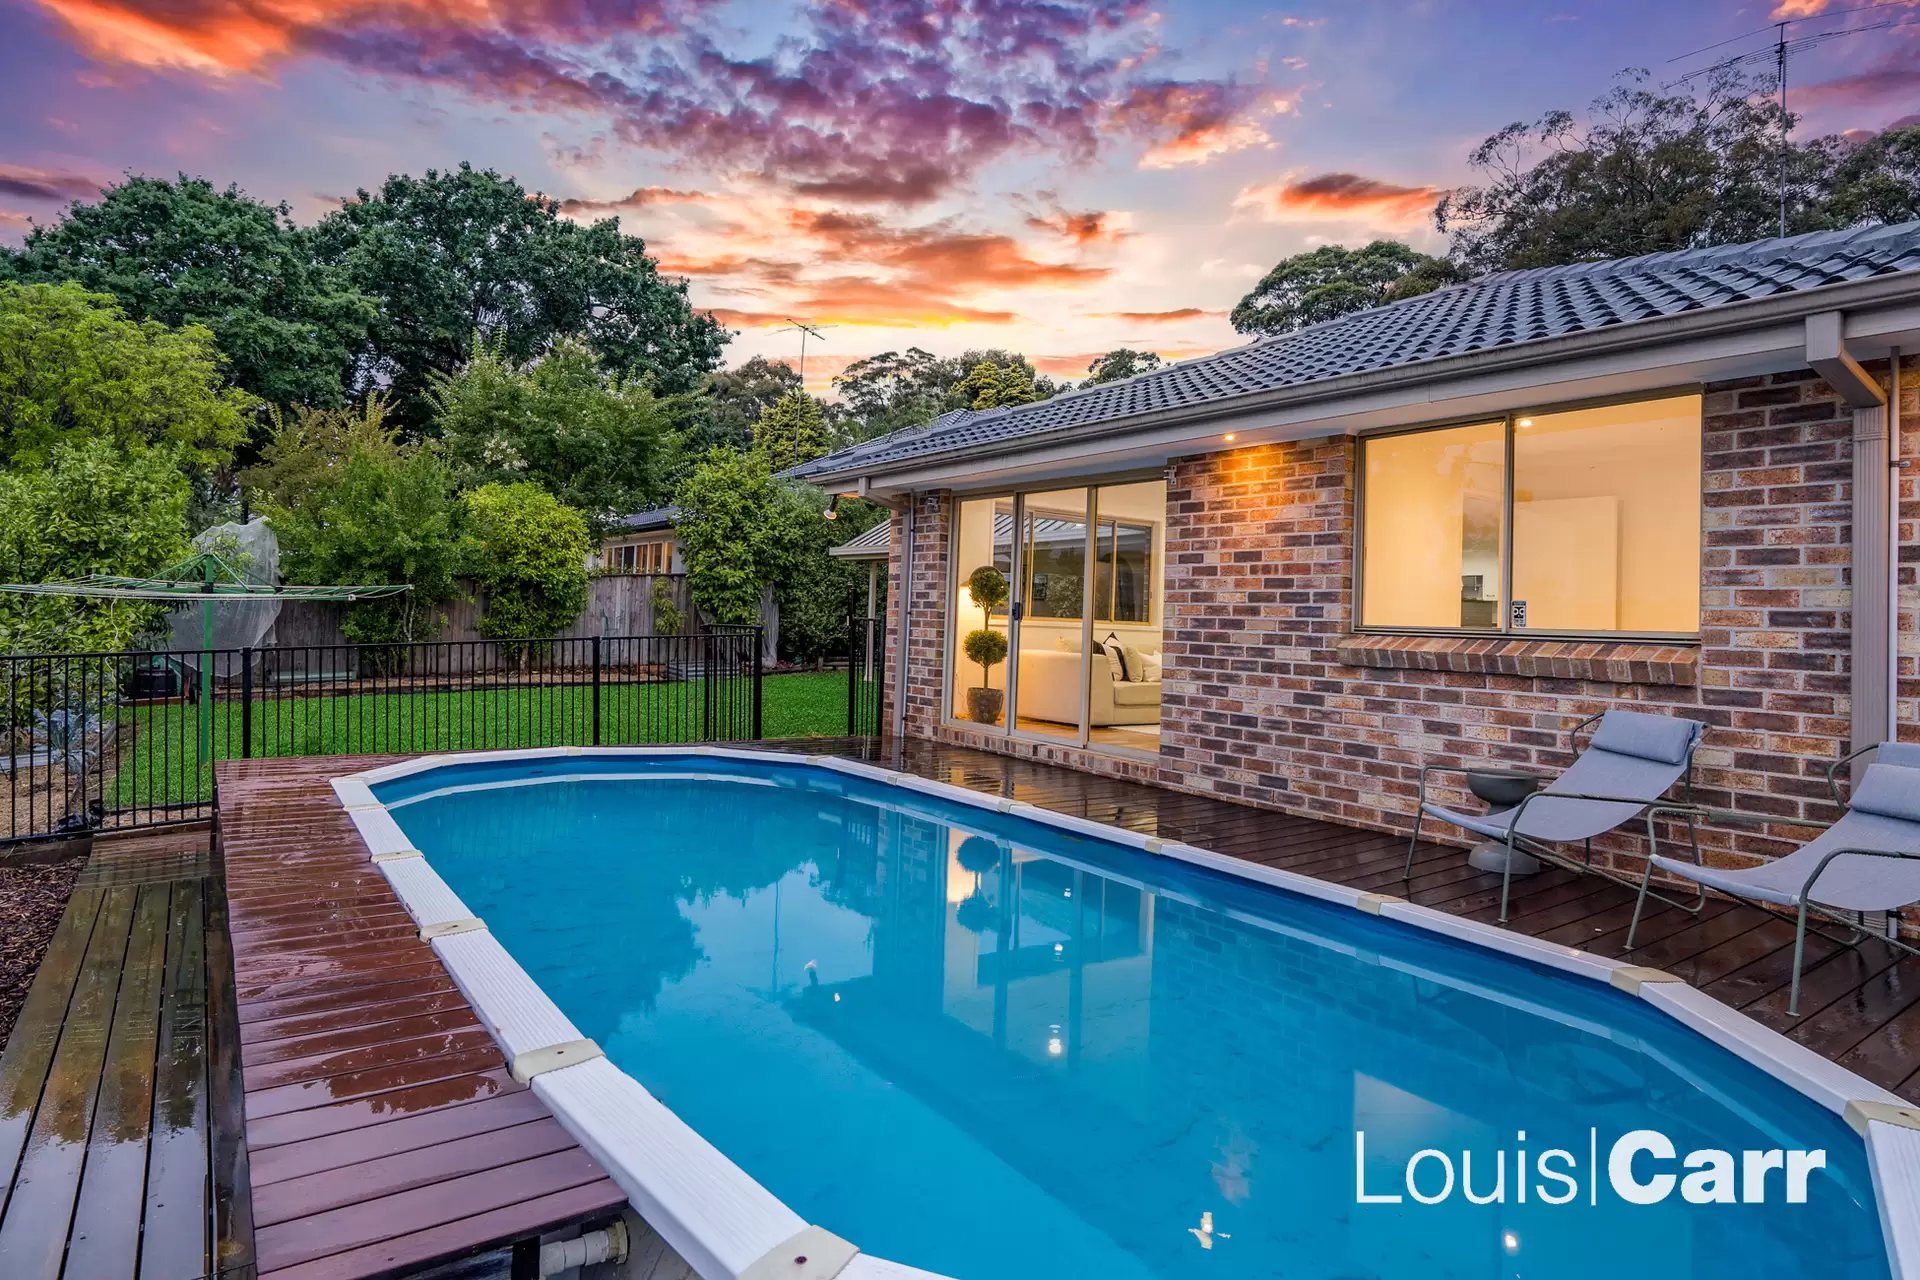 Photo #11: 57 Purchase Road, Cherrybrook - Sold by Louis Carr Real Estate